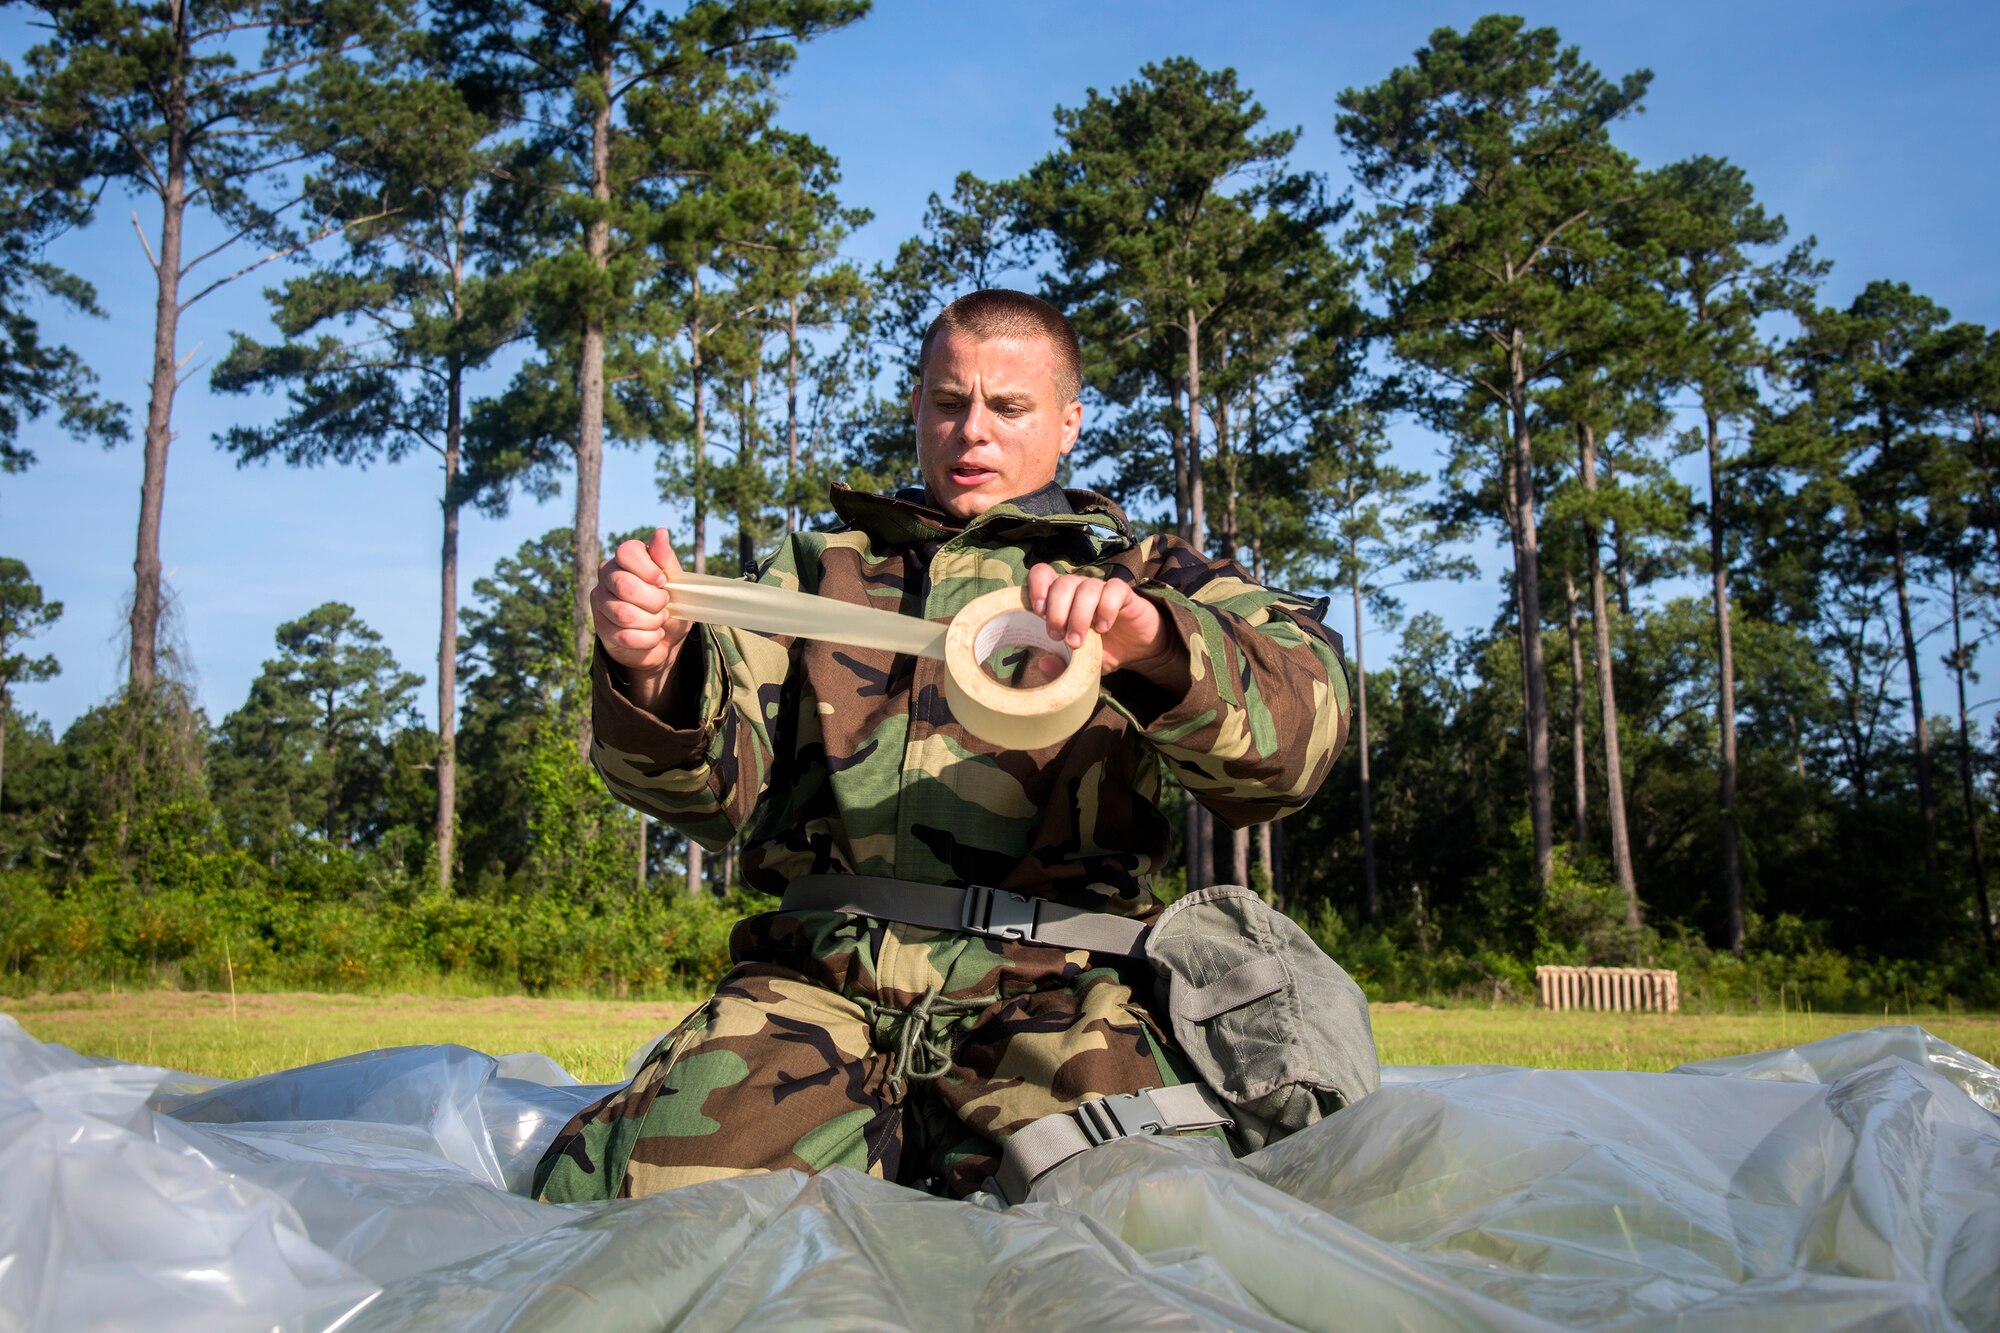 An Airman from the 23d Civil Engineer Squadron, pulls tape for a plastic covering during a Chemical, Biological, Radiological, Nuclear and Explosive (CBRNE) Olympics, June 21, 2018, at Moody Air Force Base, Ga.  Moody held its first CBRNE Olympics to further Airmen’s overall knowledge on all of the aspects of CBRNE through a new method that was meant to establish a sense of competition and camaraderie. (U.S. Air Force photo by Airman 1st Class Eugene Oliver)